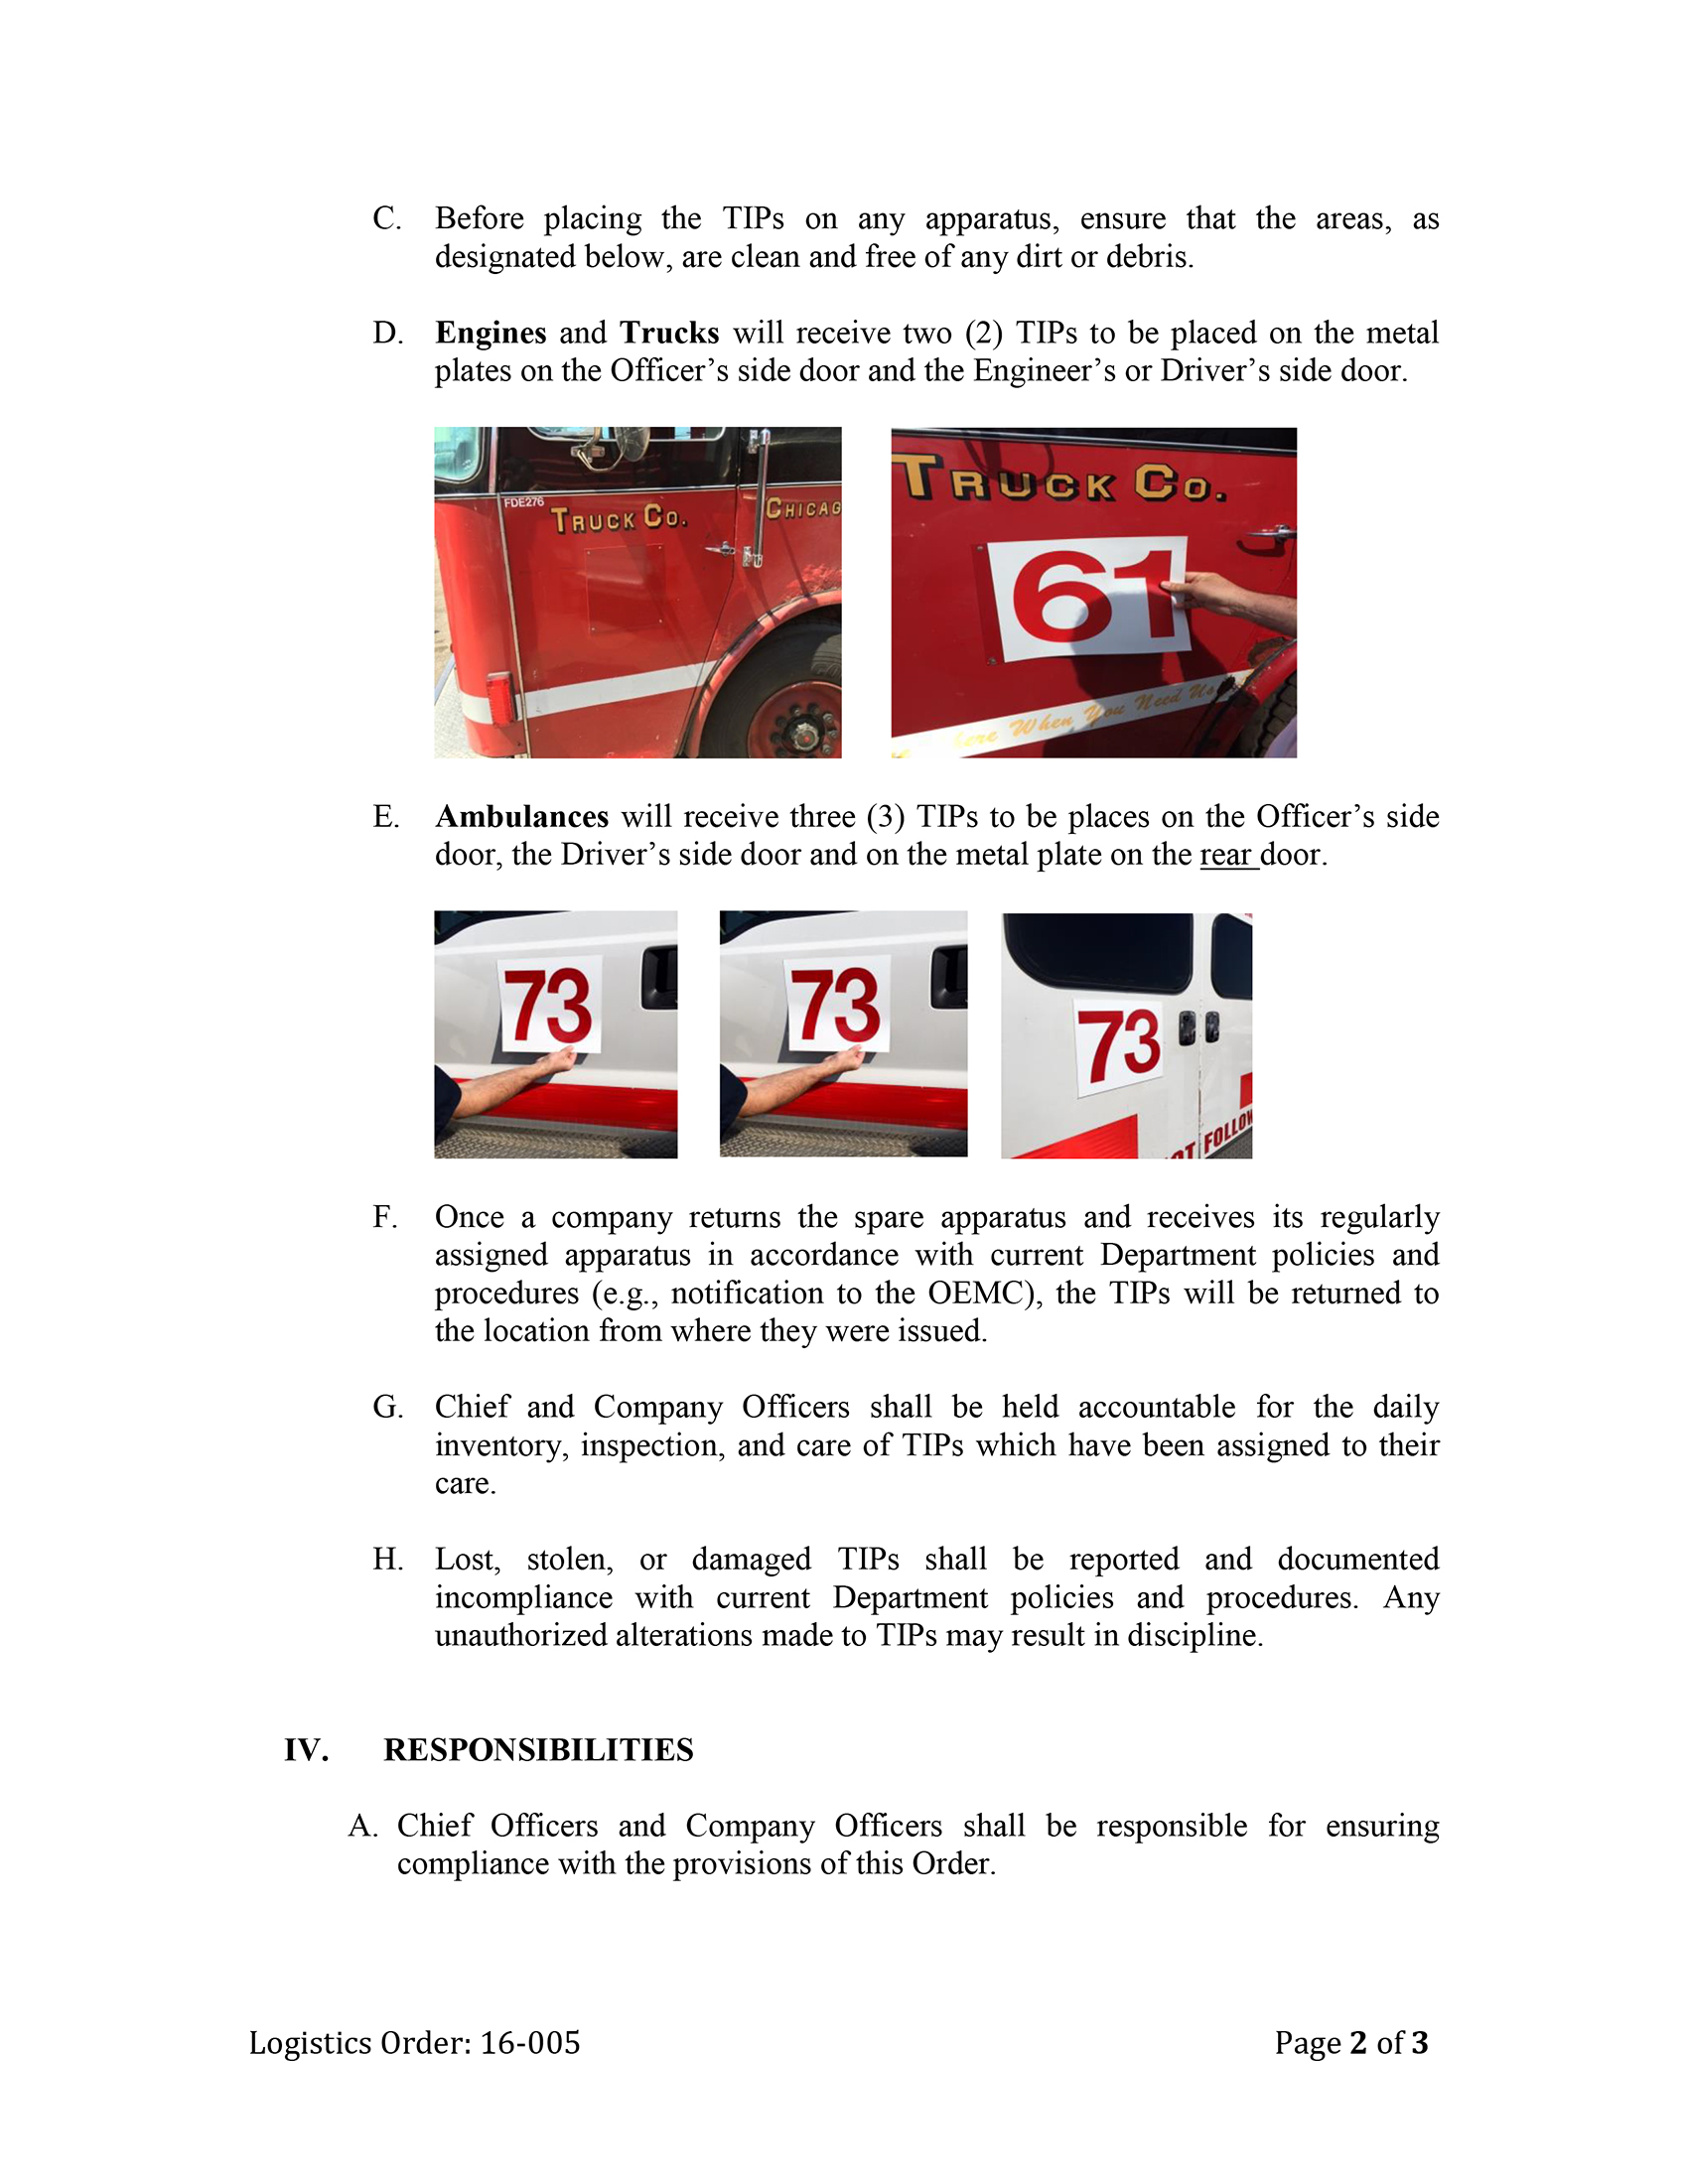 CFD Logistics Order 16-005 - Temporary Identification Placards